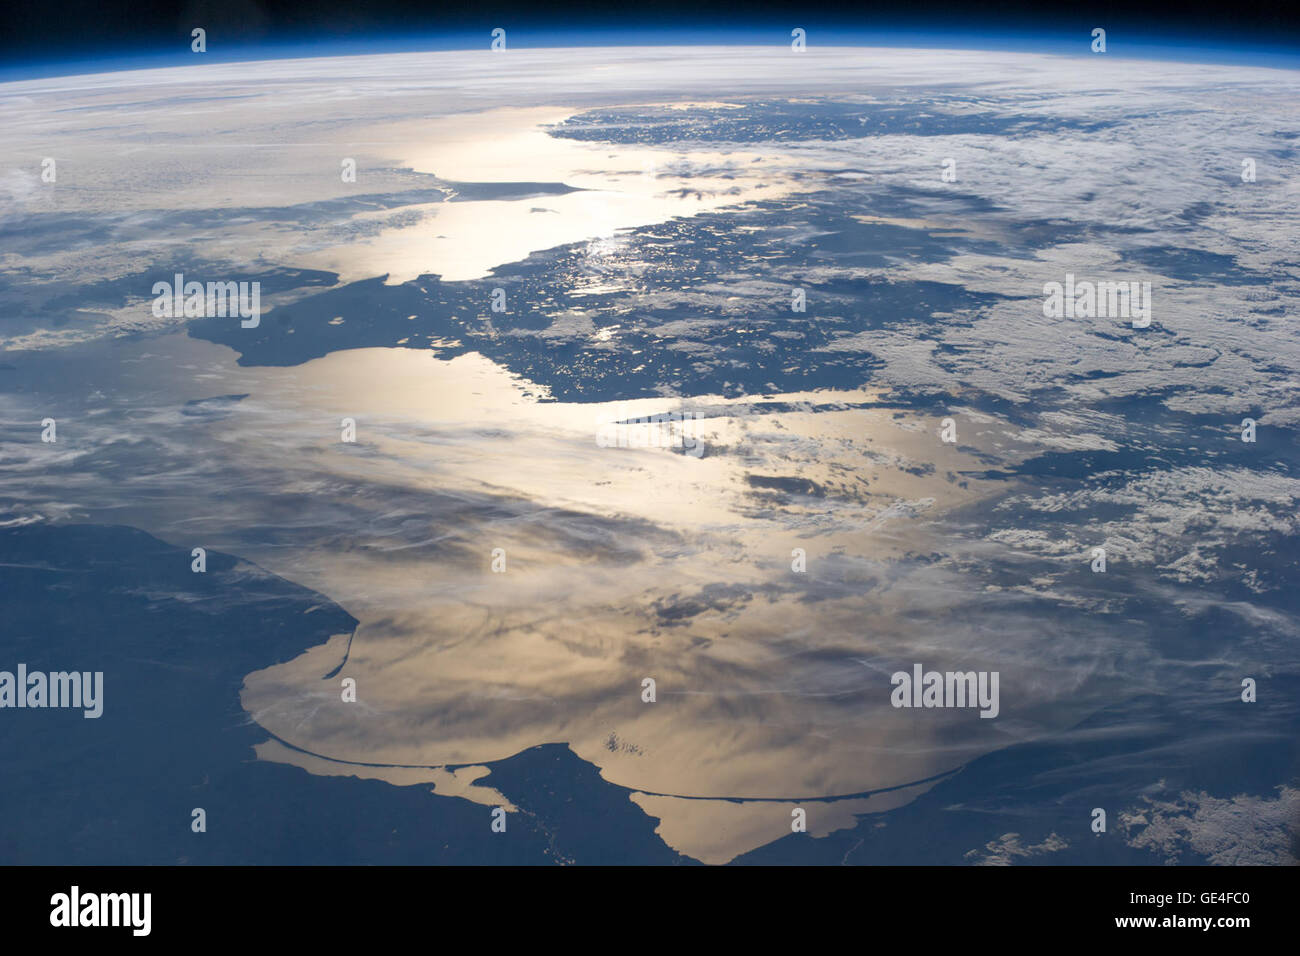 Description An astronaut on the International Space Station (ISS) took this panorama looking aft of the spacecraft (backwards along the orbital path) as the Sun was setting over the North Sea. Seen from the ISS, the Sun’s reflection point moves quickly across the landscape, momentarily lighting up water bodies. In this fleeting view from June 15, 2014, the coast of southern Norway is outlined near the horizon. The brightest reflection highlights the narrow sea passage known as the Skagerrak—revealing the thin tip of Denmark. Numerous small lakes in southern Sweden appear at image center, and s Stock Photo